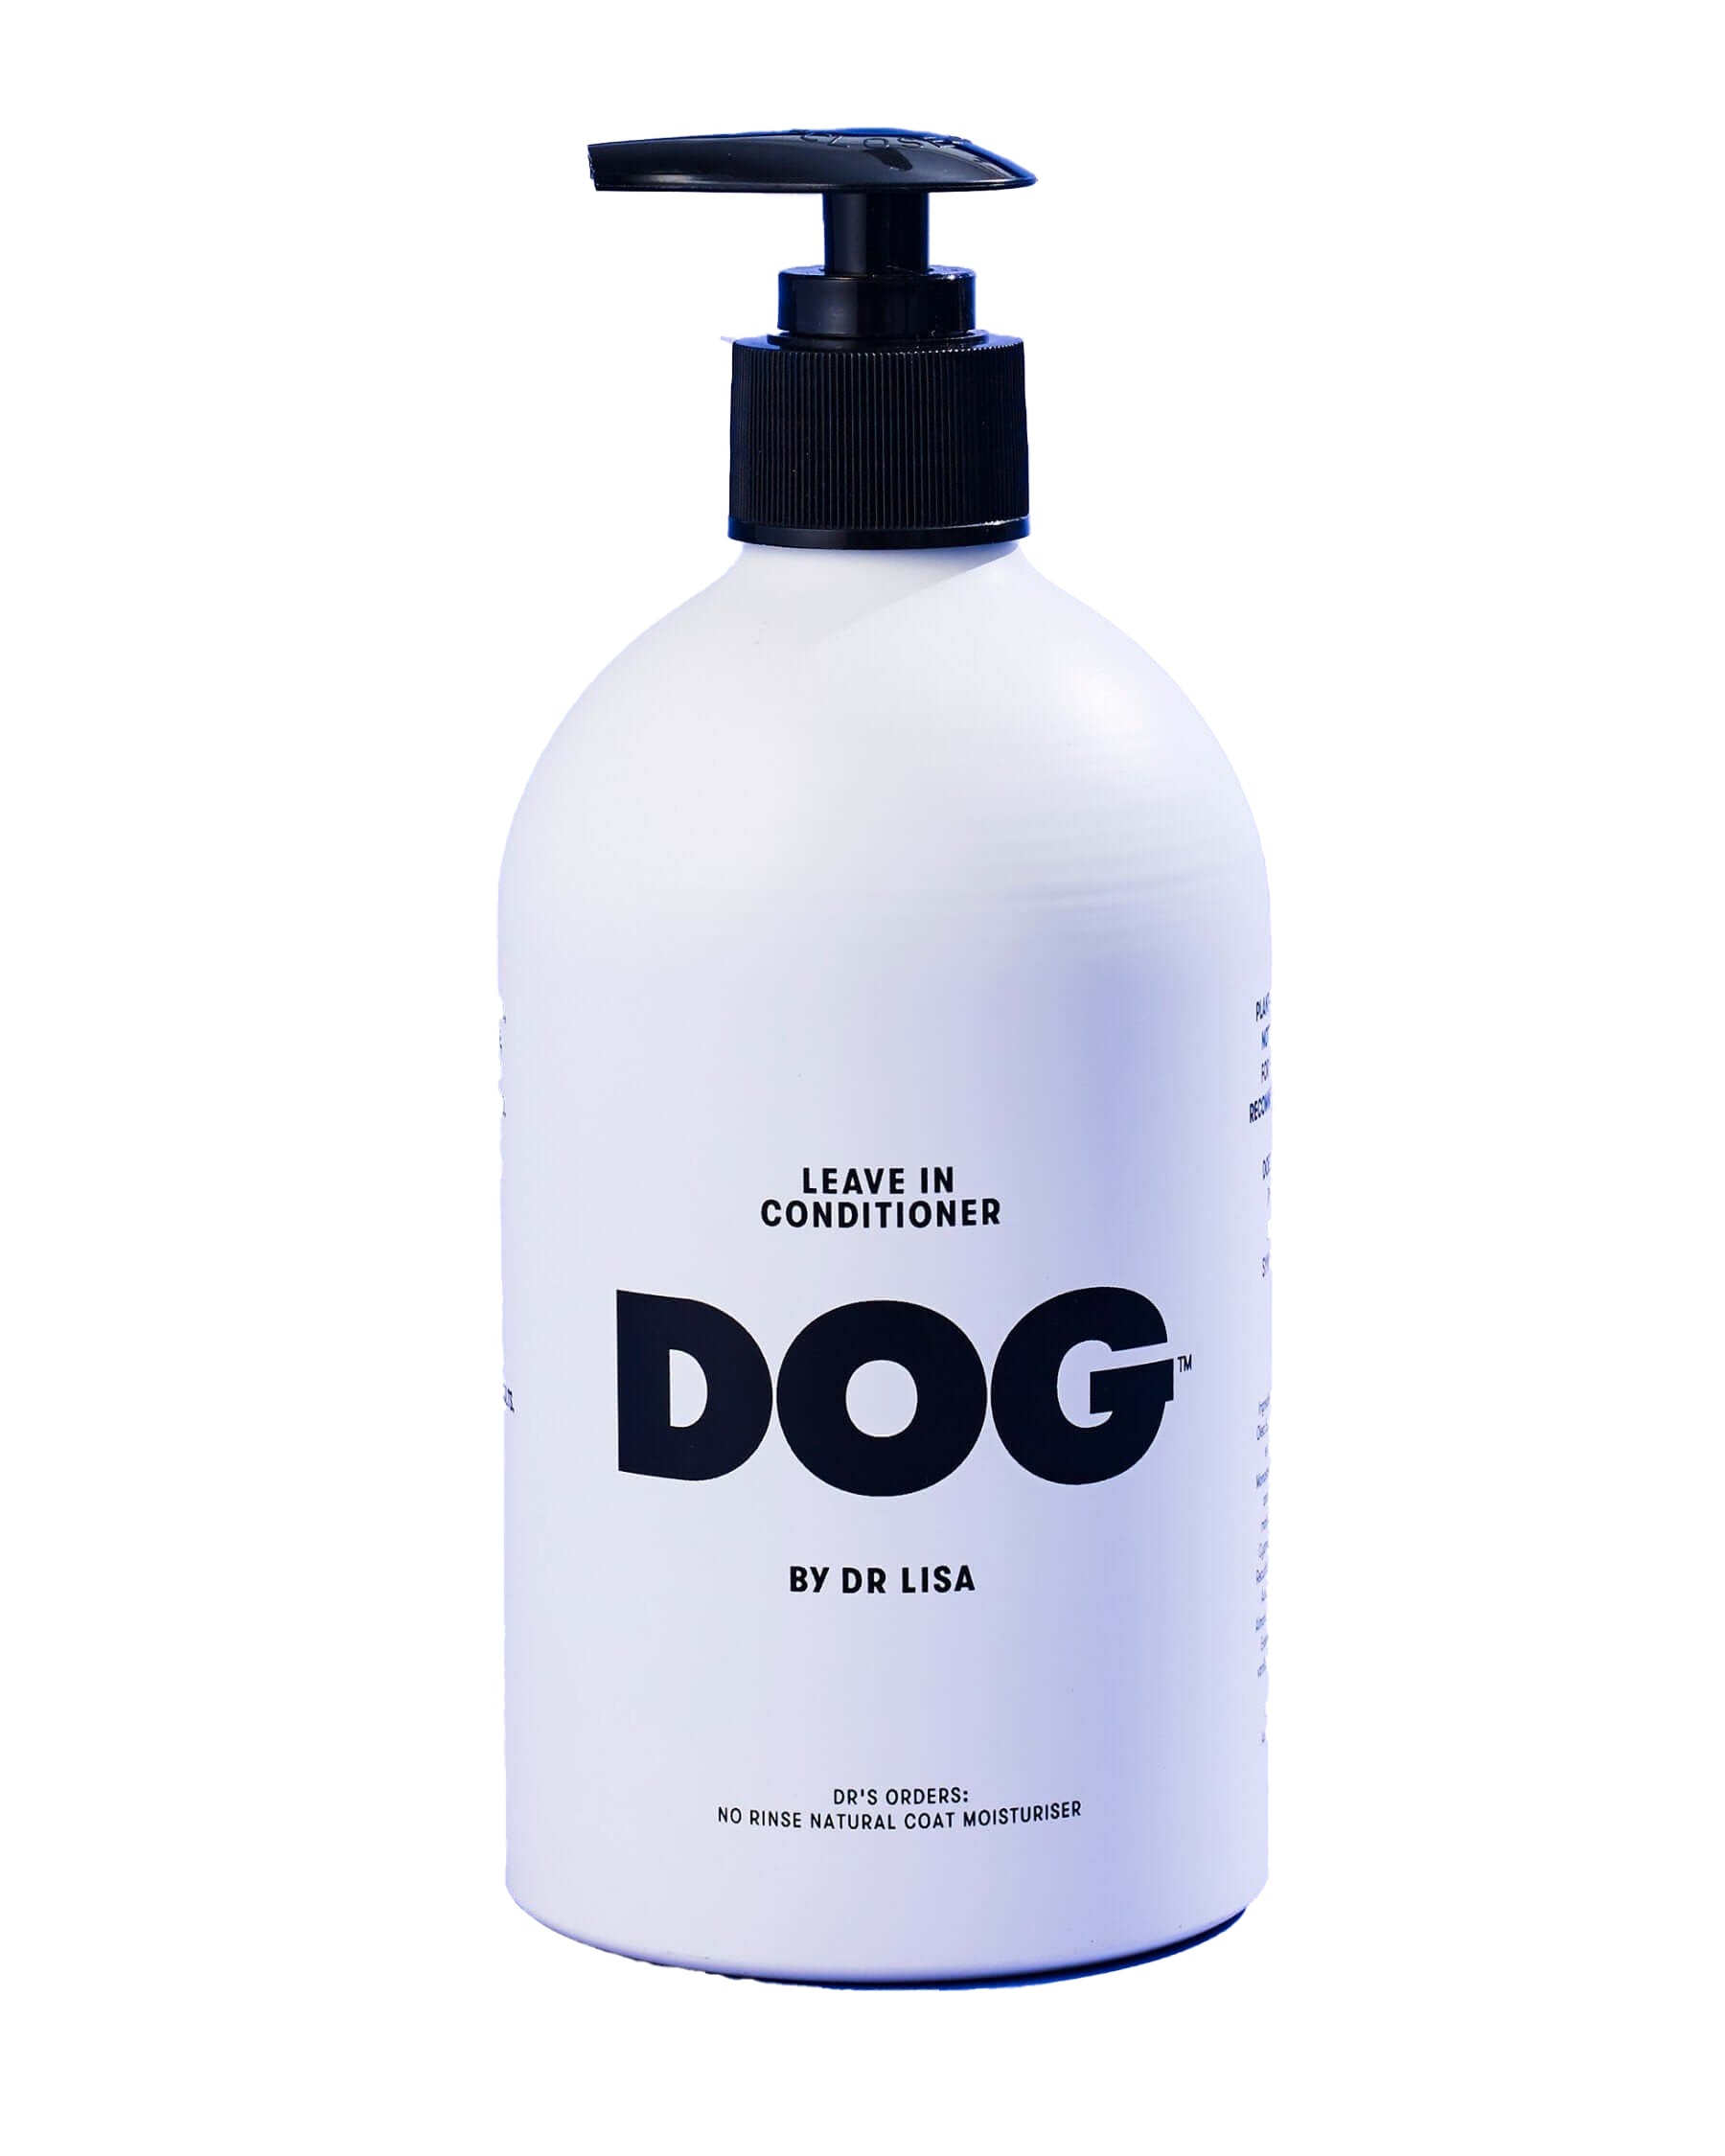 DOG by Dr Lisa Leave in Conditioner